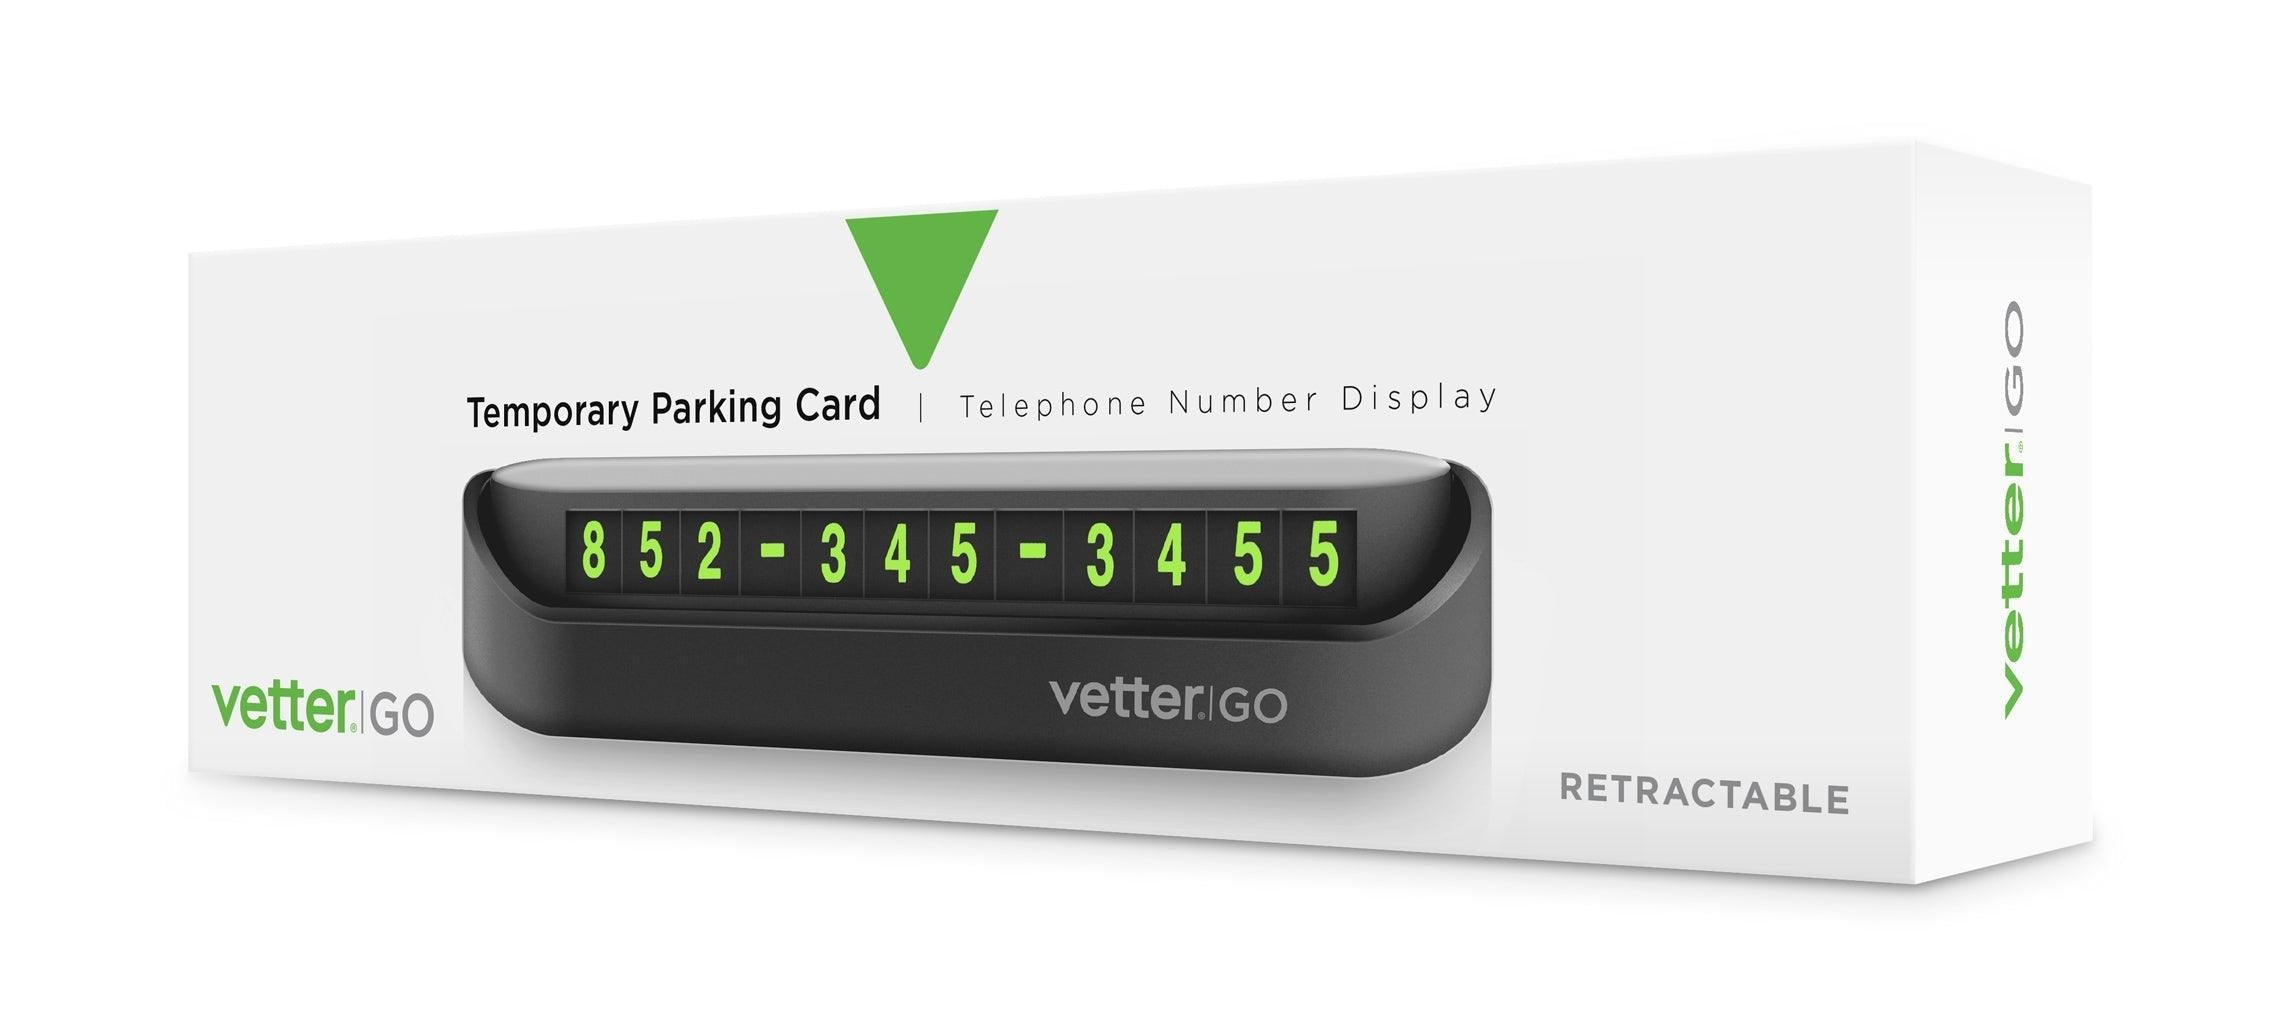 Suport Vetter GO, Temporary Parking Card, Telephone Number Display, Retractable - vetter.ro